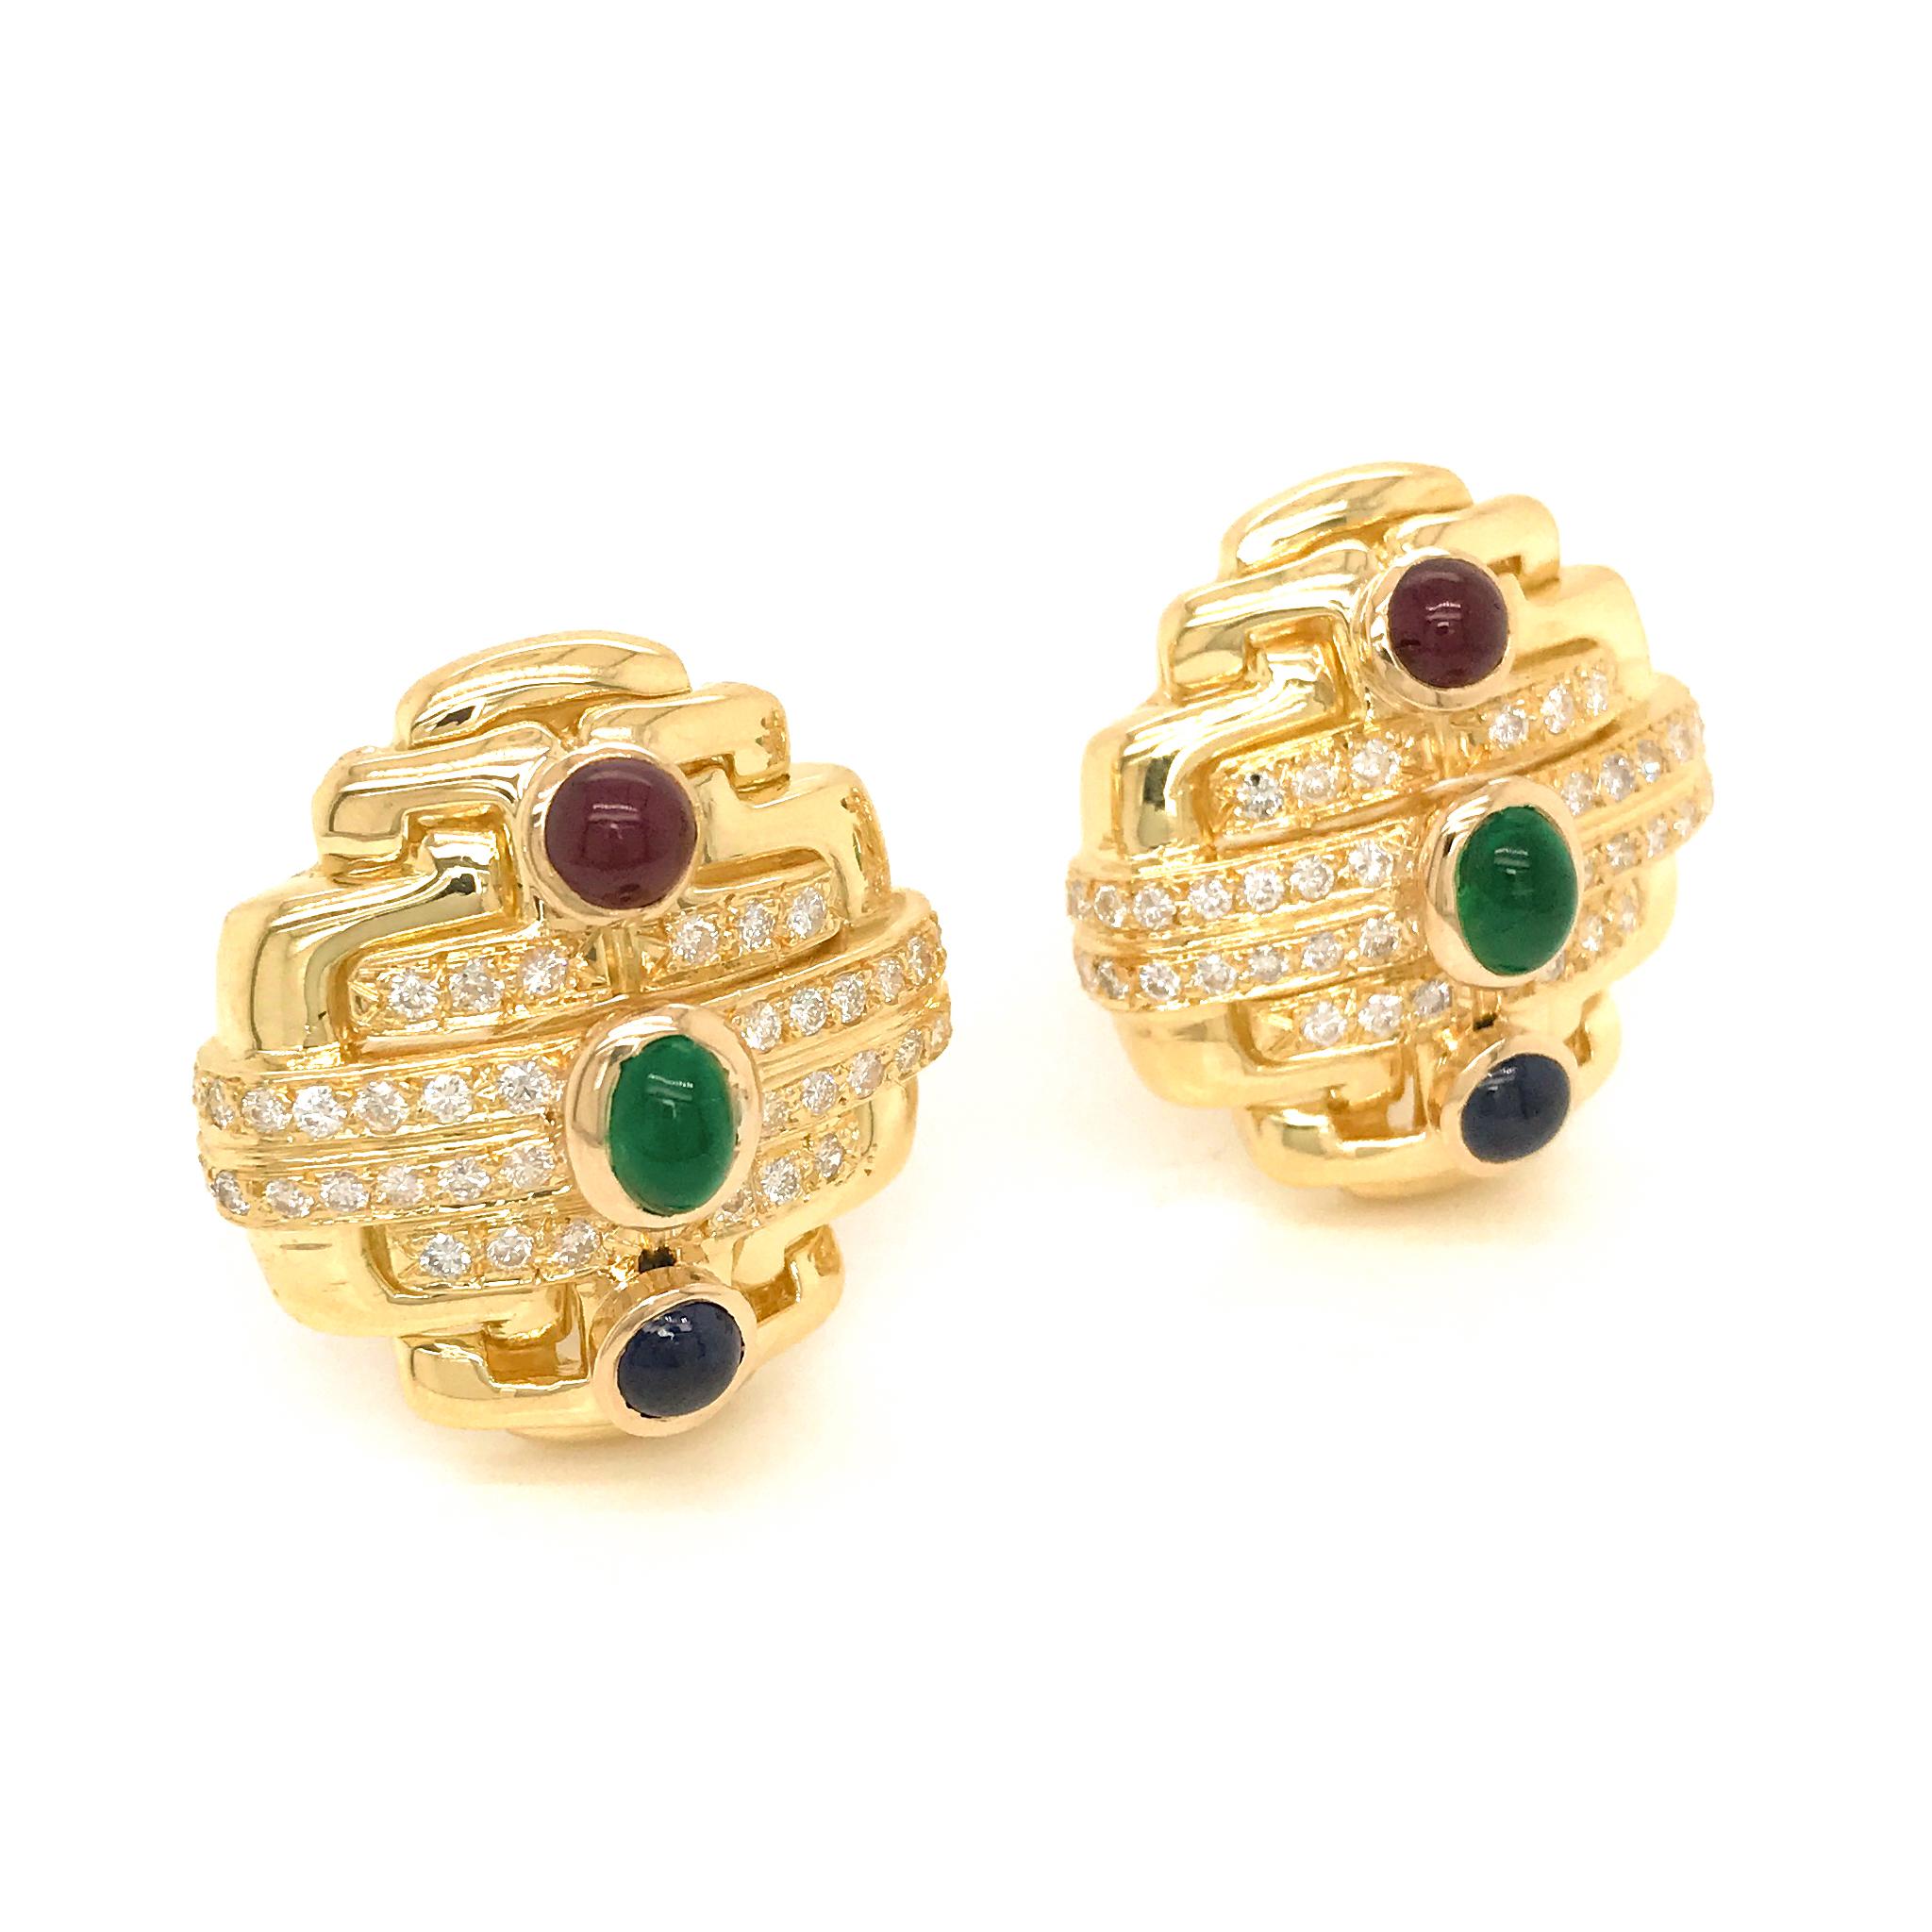 18 Karat Yellow Gold Precious Stone and Diamond Earrings In Excellent Condition For Sale In New York, NY